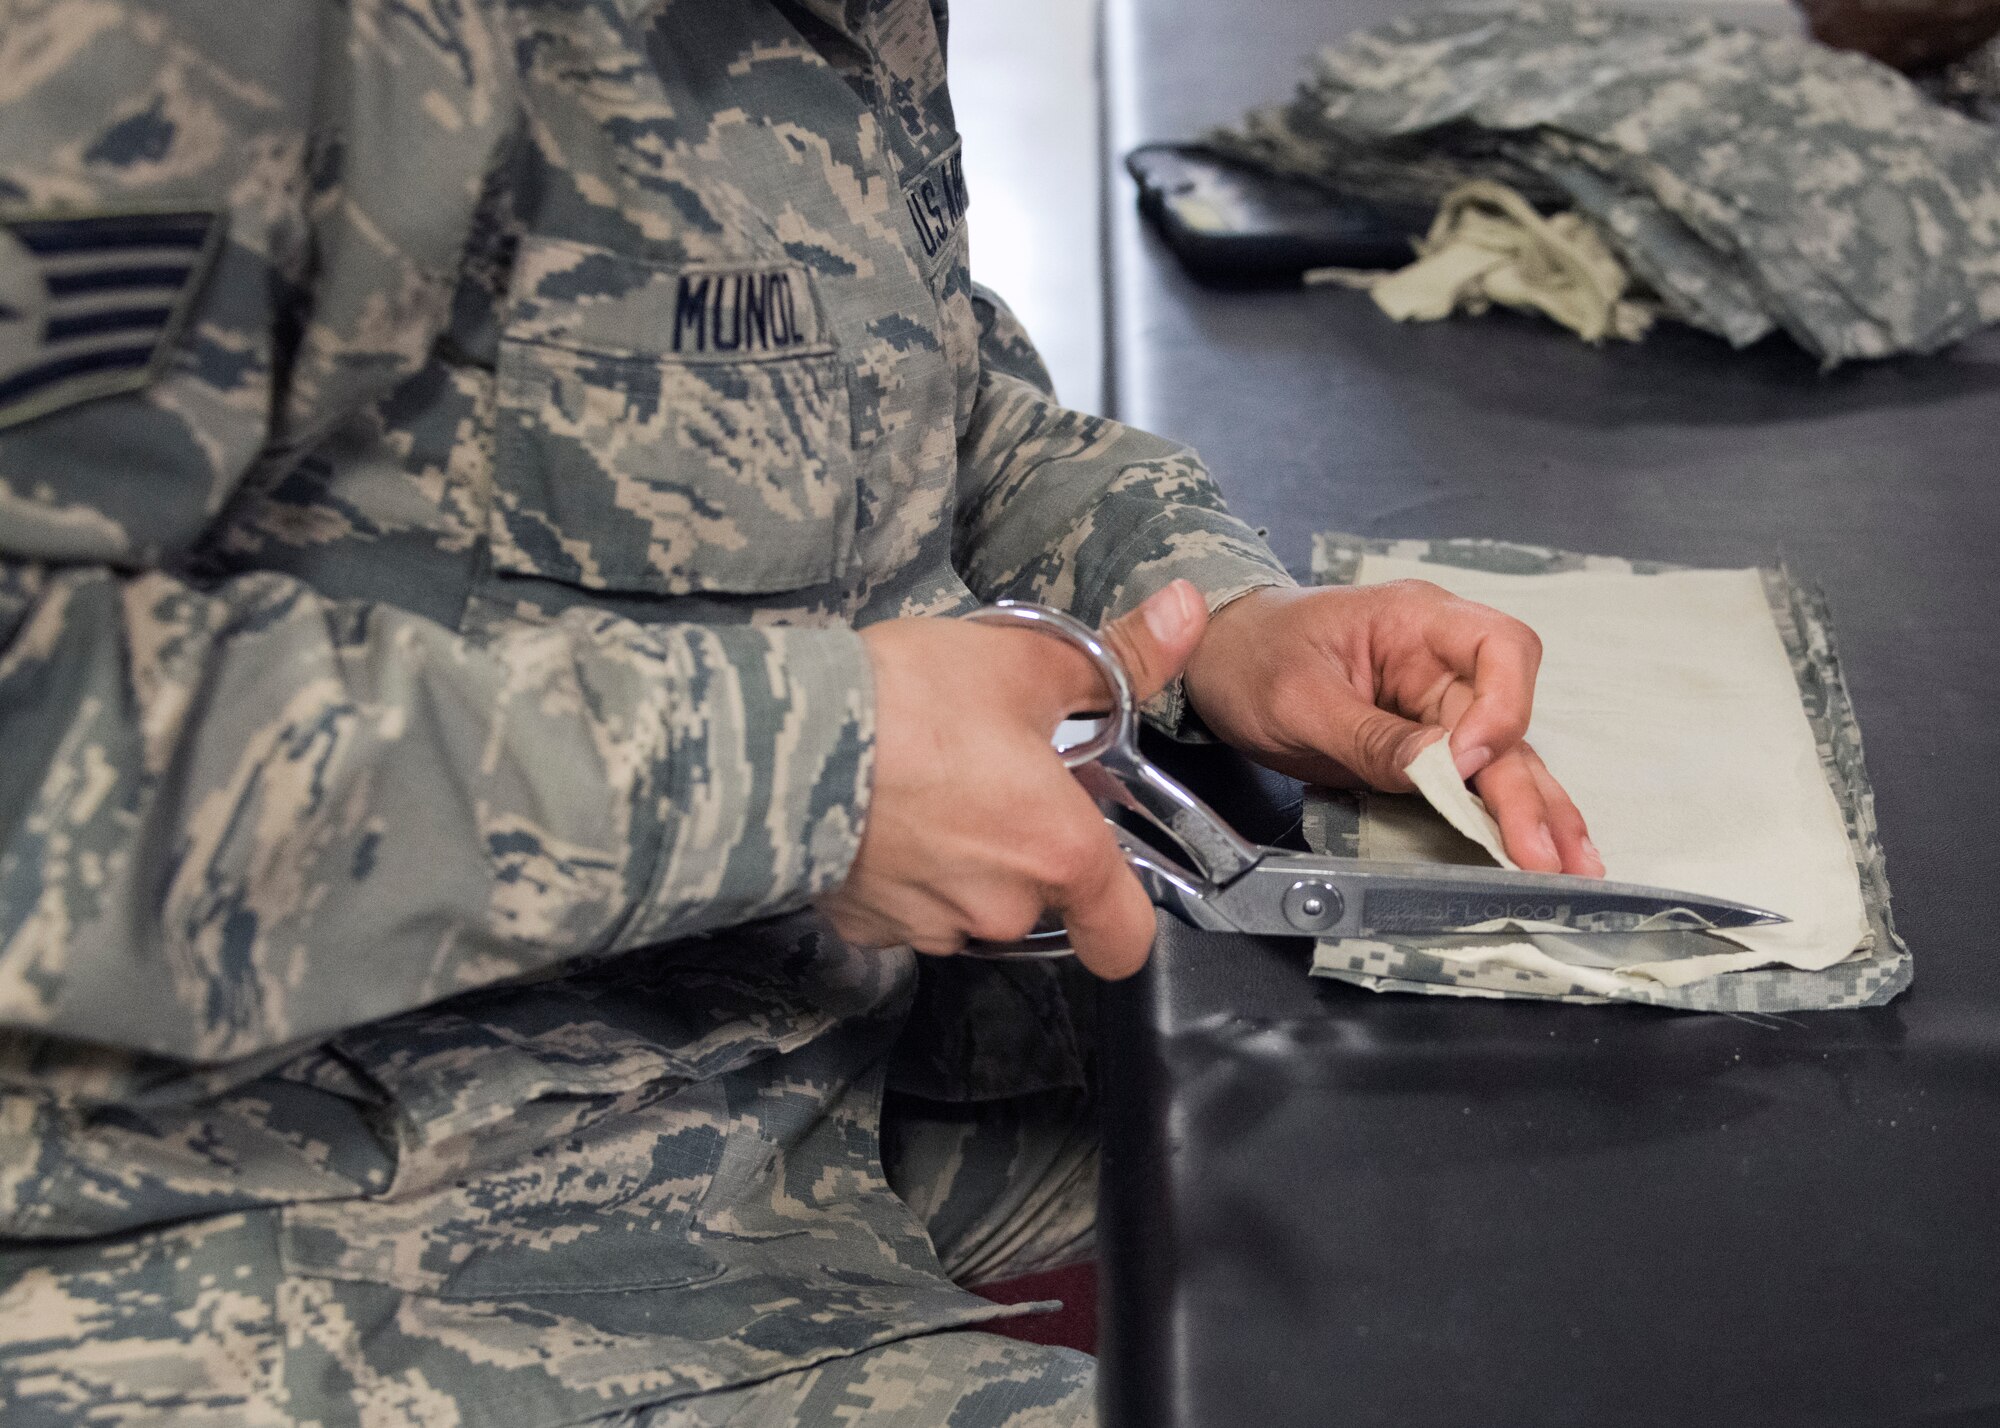 Staff Sgt. Viridiana Munoz, 459th Operations Support Squadron, Aircrew Flight Equipment technician, cuts pieces of fabric donated from the 459th Logistics Readiness Squadron, to make Air Force authorized face masks, April 10th, 2020, at Joint Base Andrews Md. Munoz and her team volunteers to make at least 1,000 face makes for aircrew, maintainers and members of the wing to provide an additional layer of safety as the mission continues through COVID-19. (U.S. Air Force photo/Staff Sgt. Cierra Presentado)